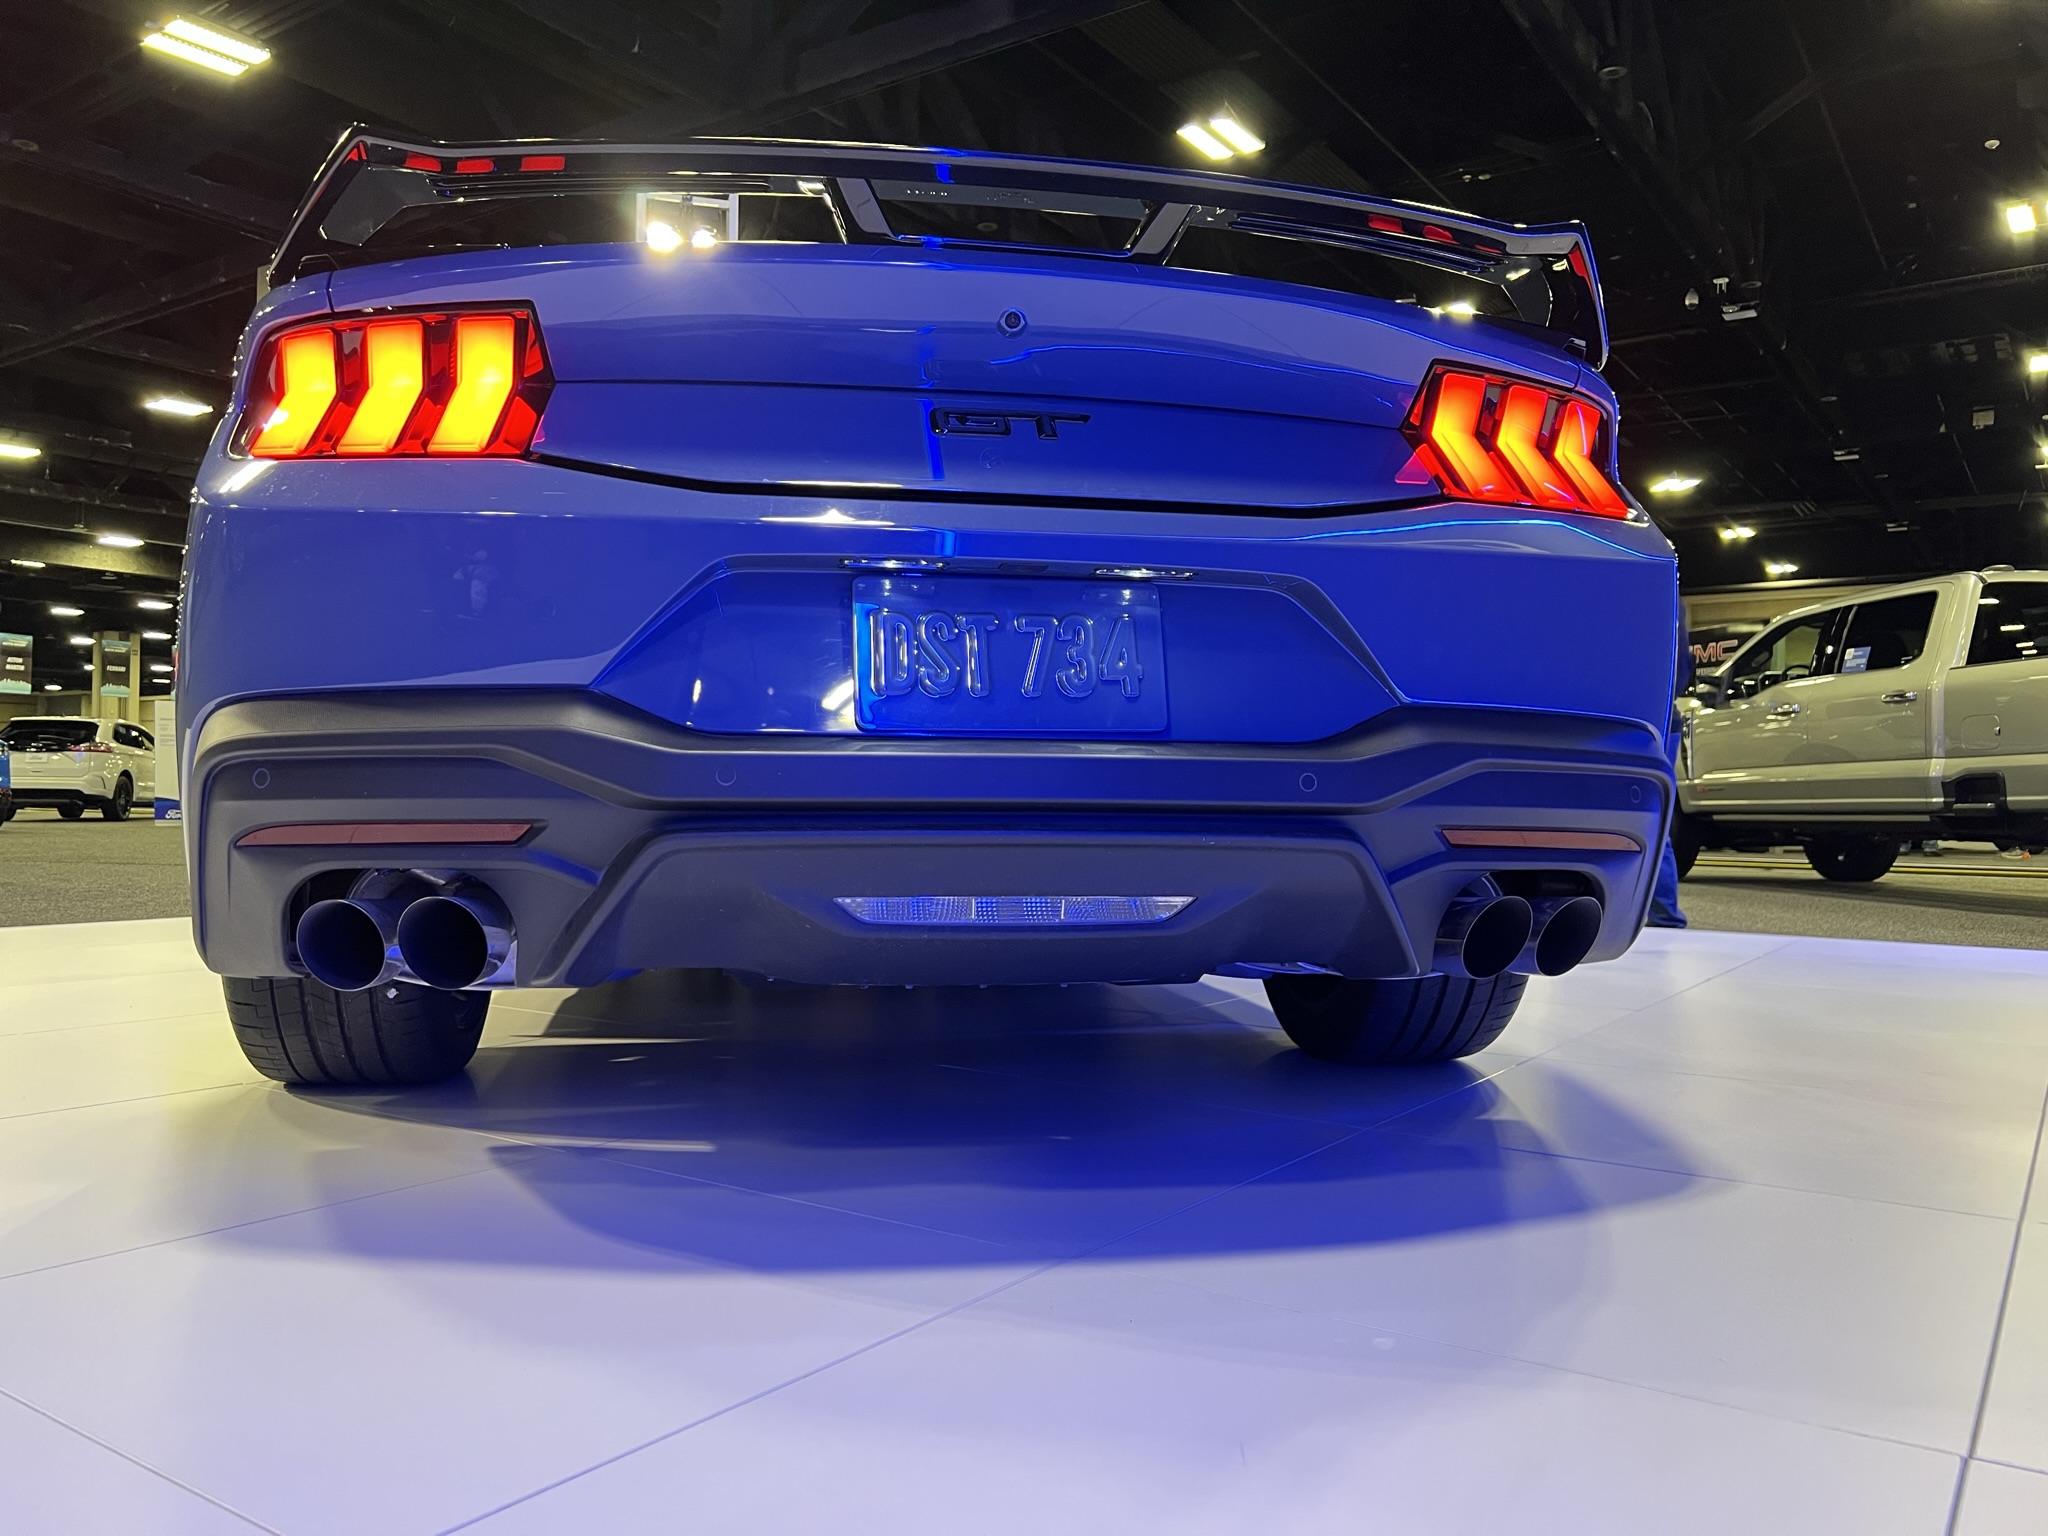 S650 Mustang S650 GT @ Charlotte Auto Show IMG_1814.JPEG